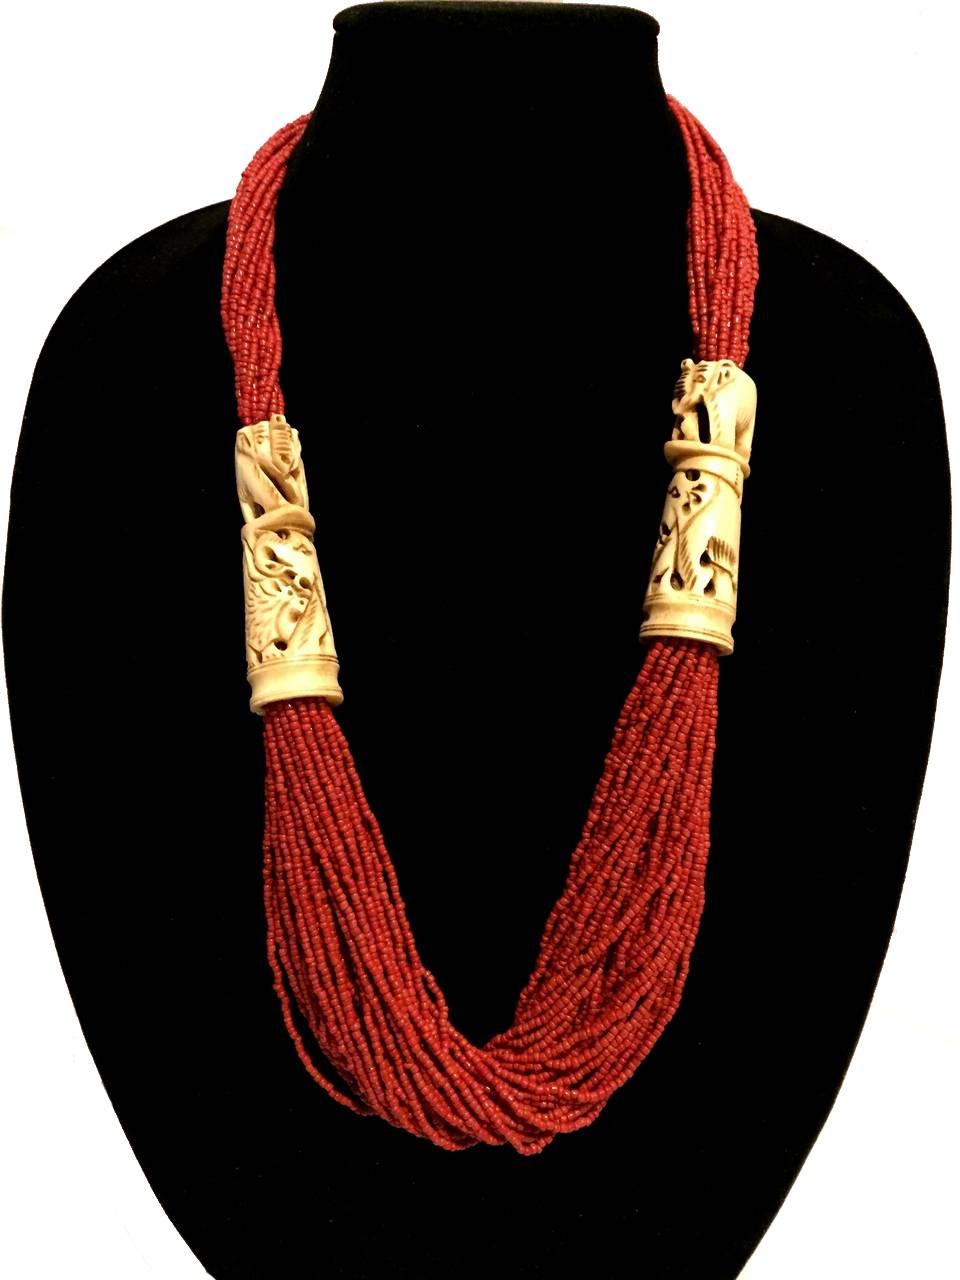 A collection of beautiful Tibetan necklaces. Materials include bone, glass, faux amber/turquoise/coral, silver metal and resin. Each piece is meticulously hand made by the Tibetan women at the foot of the Himalaya. This collection consists some one